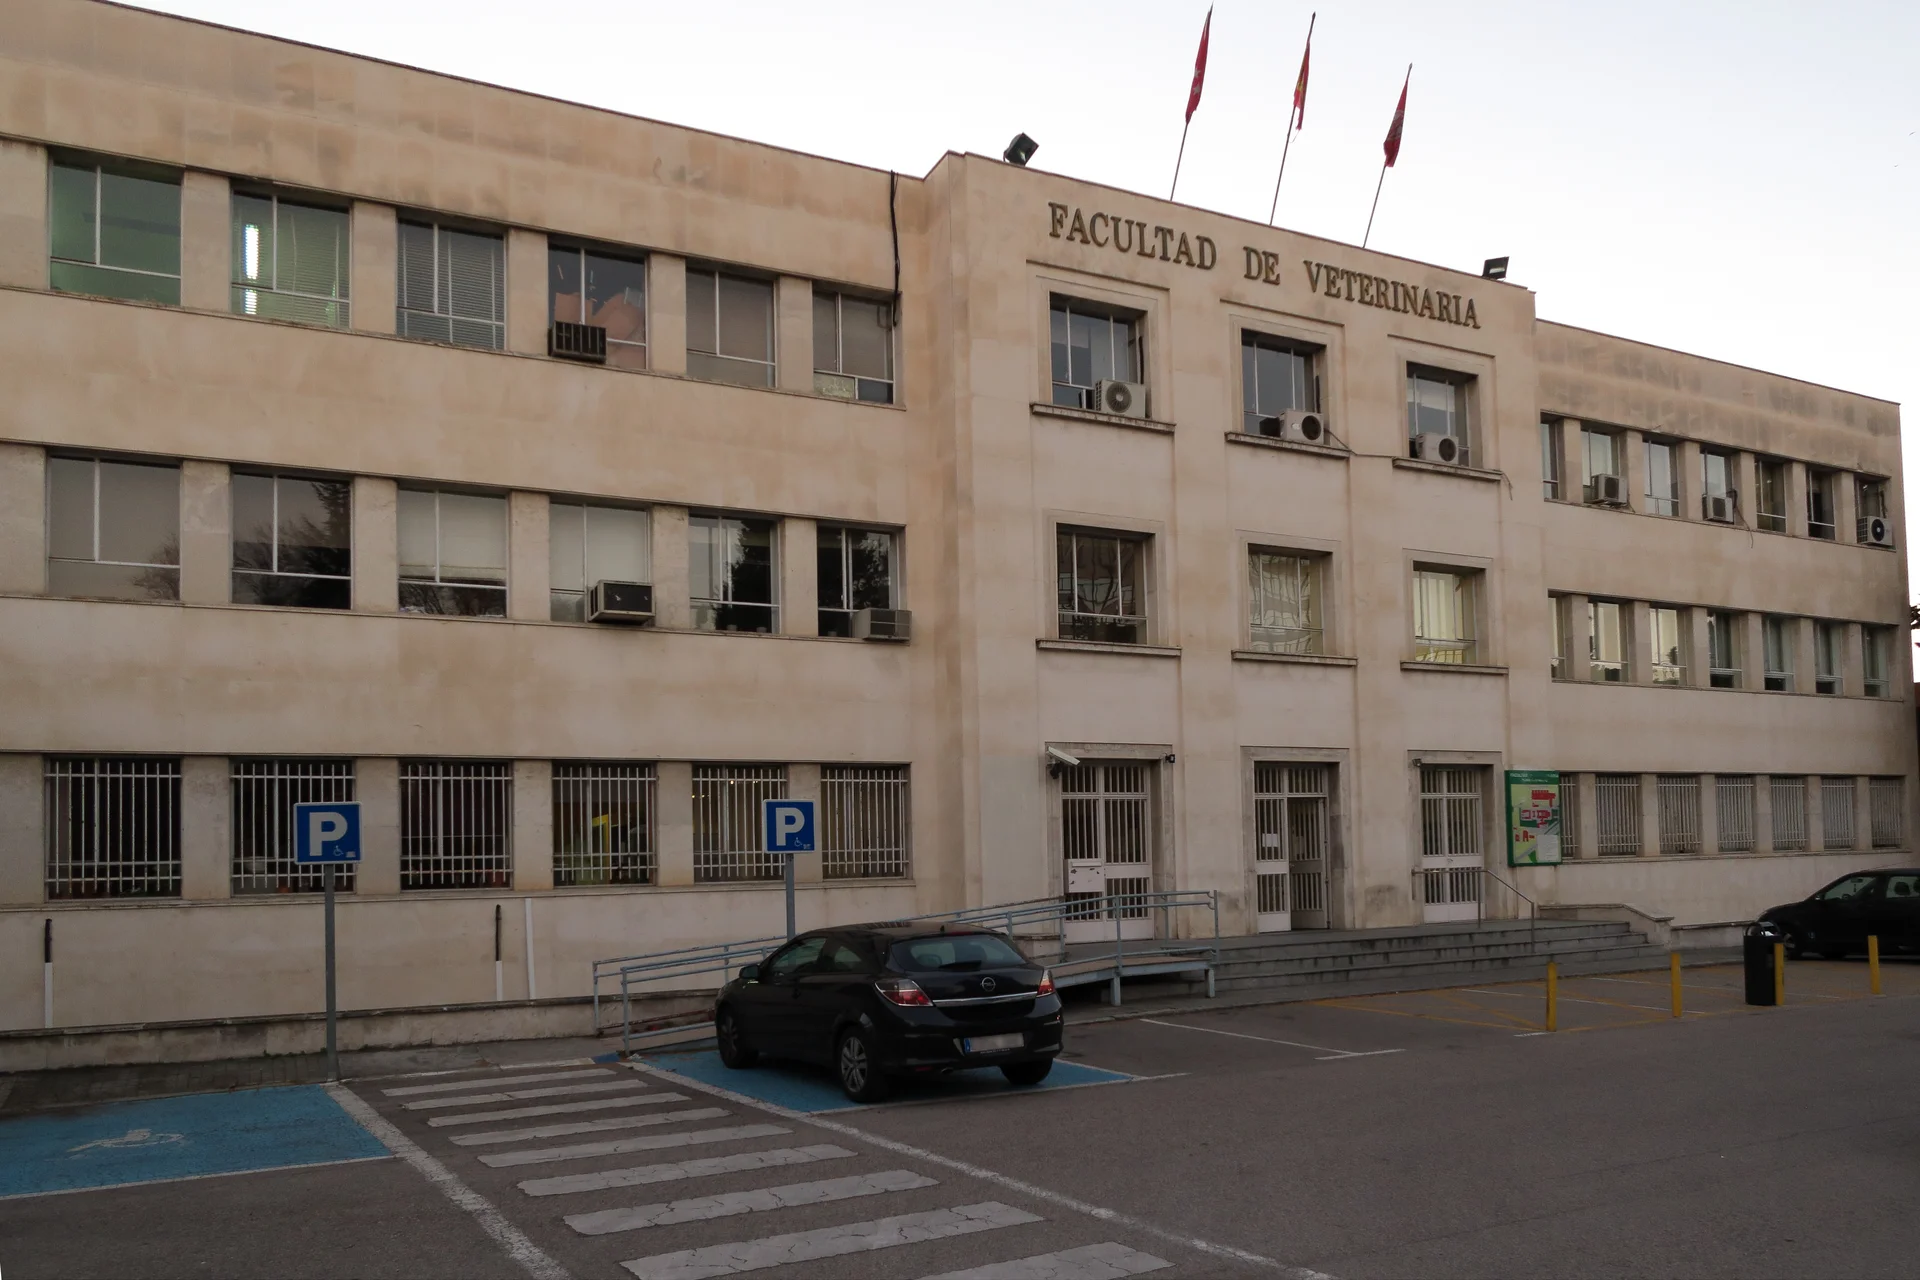 Information about The Complutense University Madrid